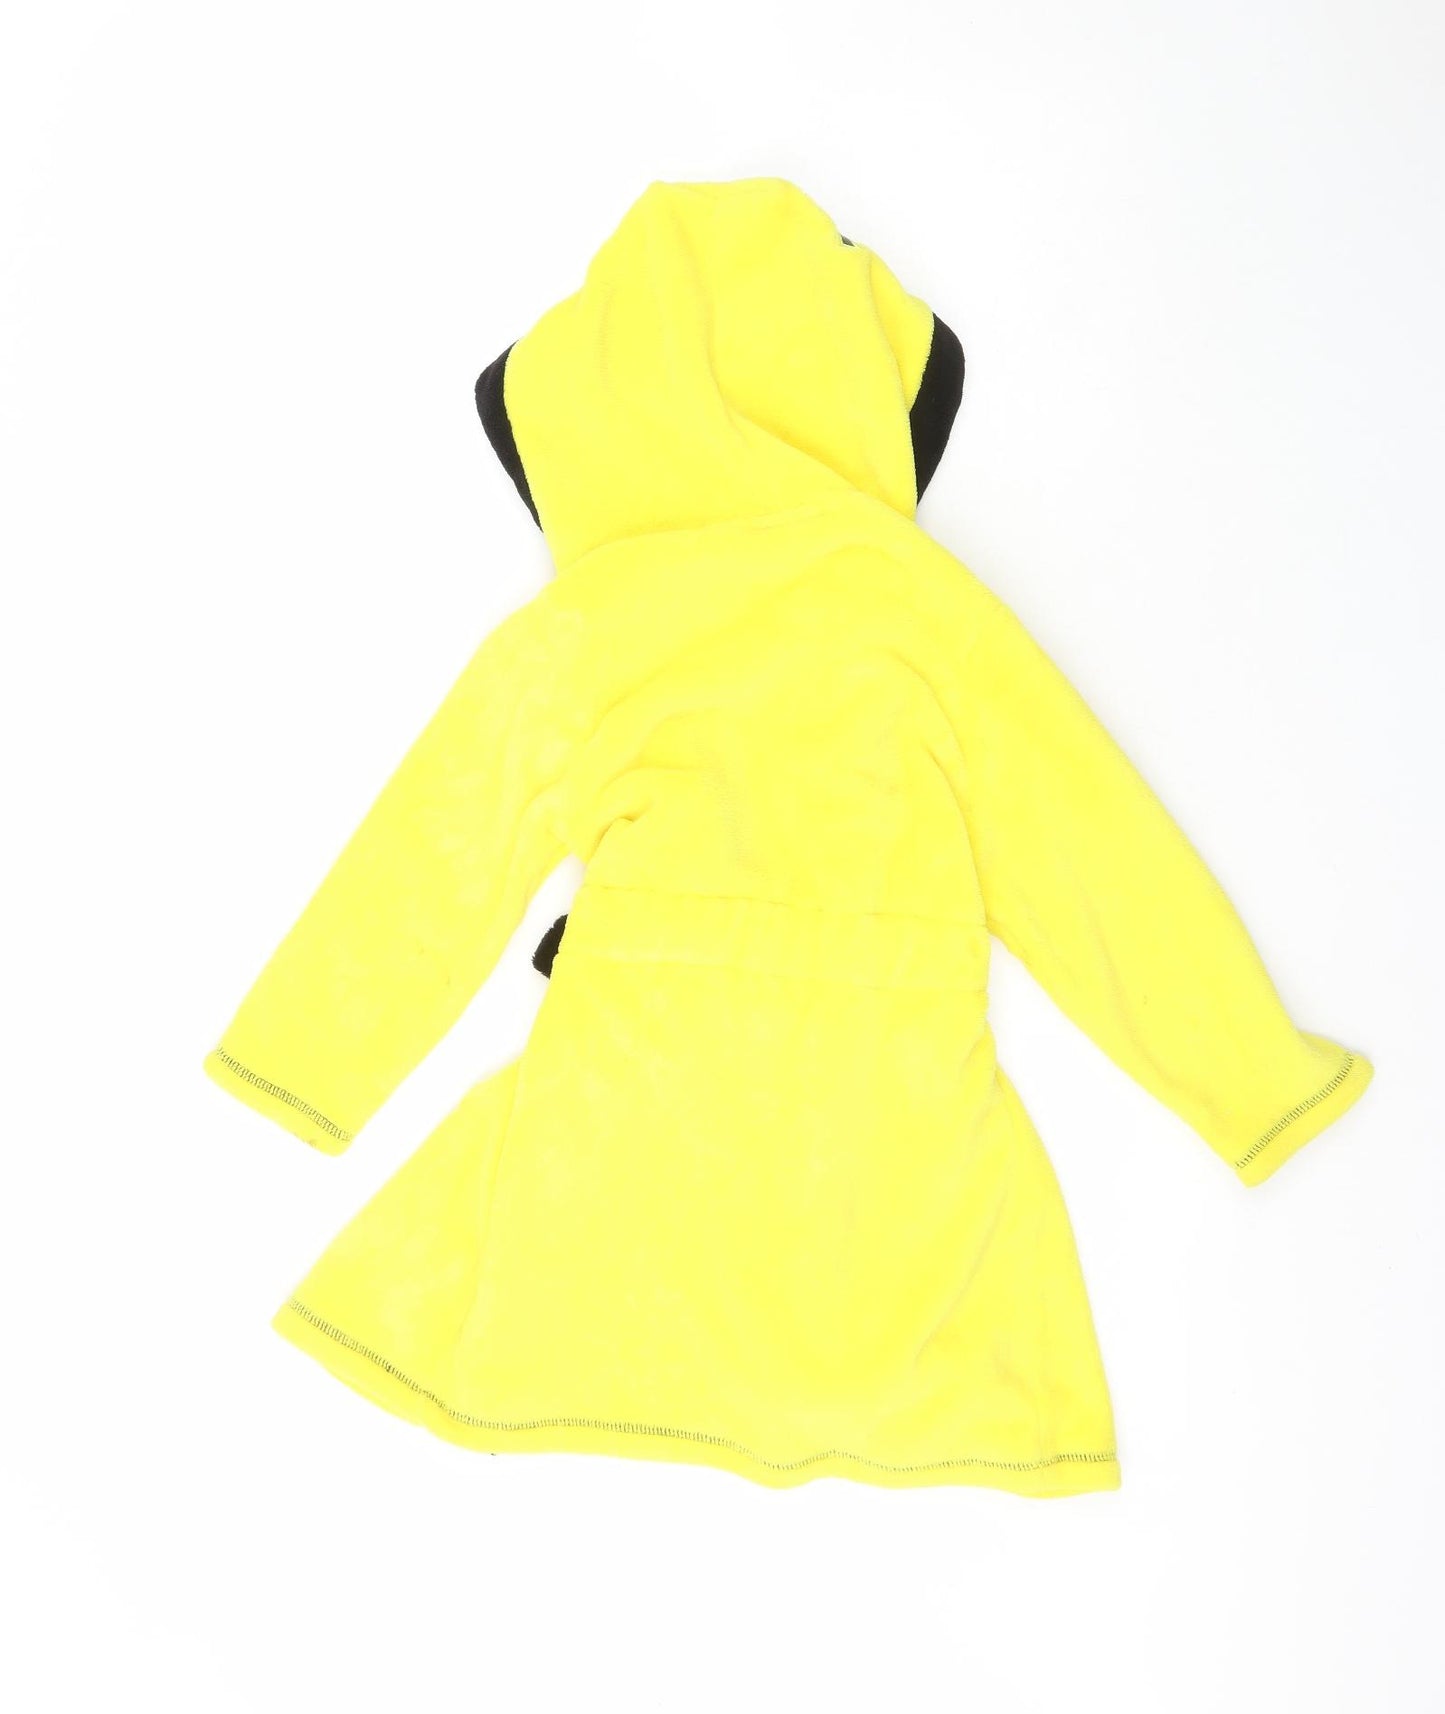 Preworn Boys Yellow Solid 100% Polyester  Gown Size 5-6 Years